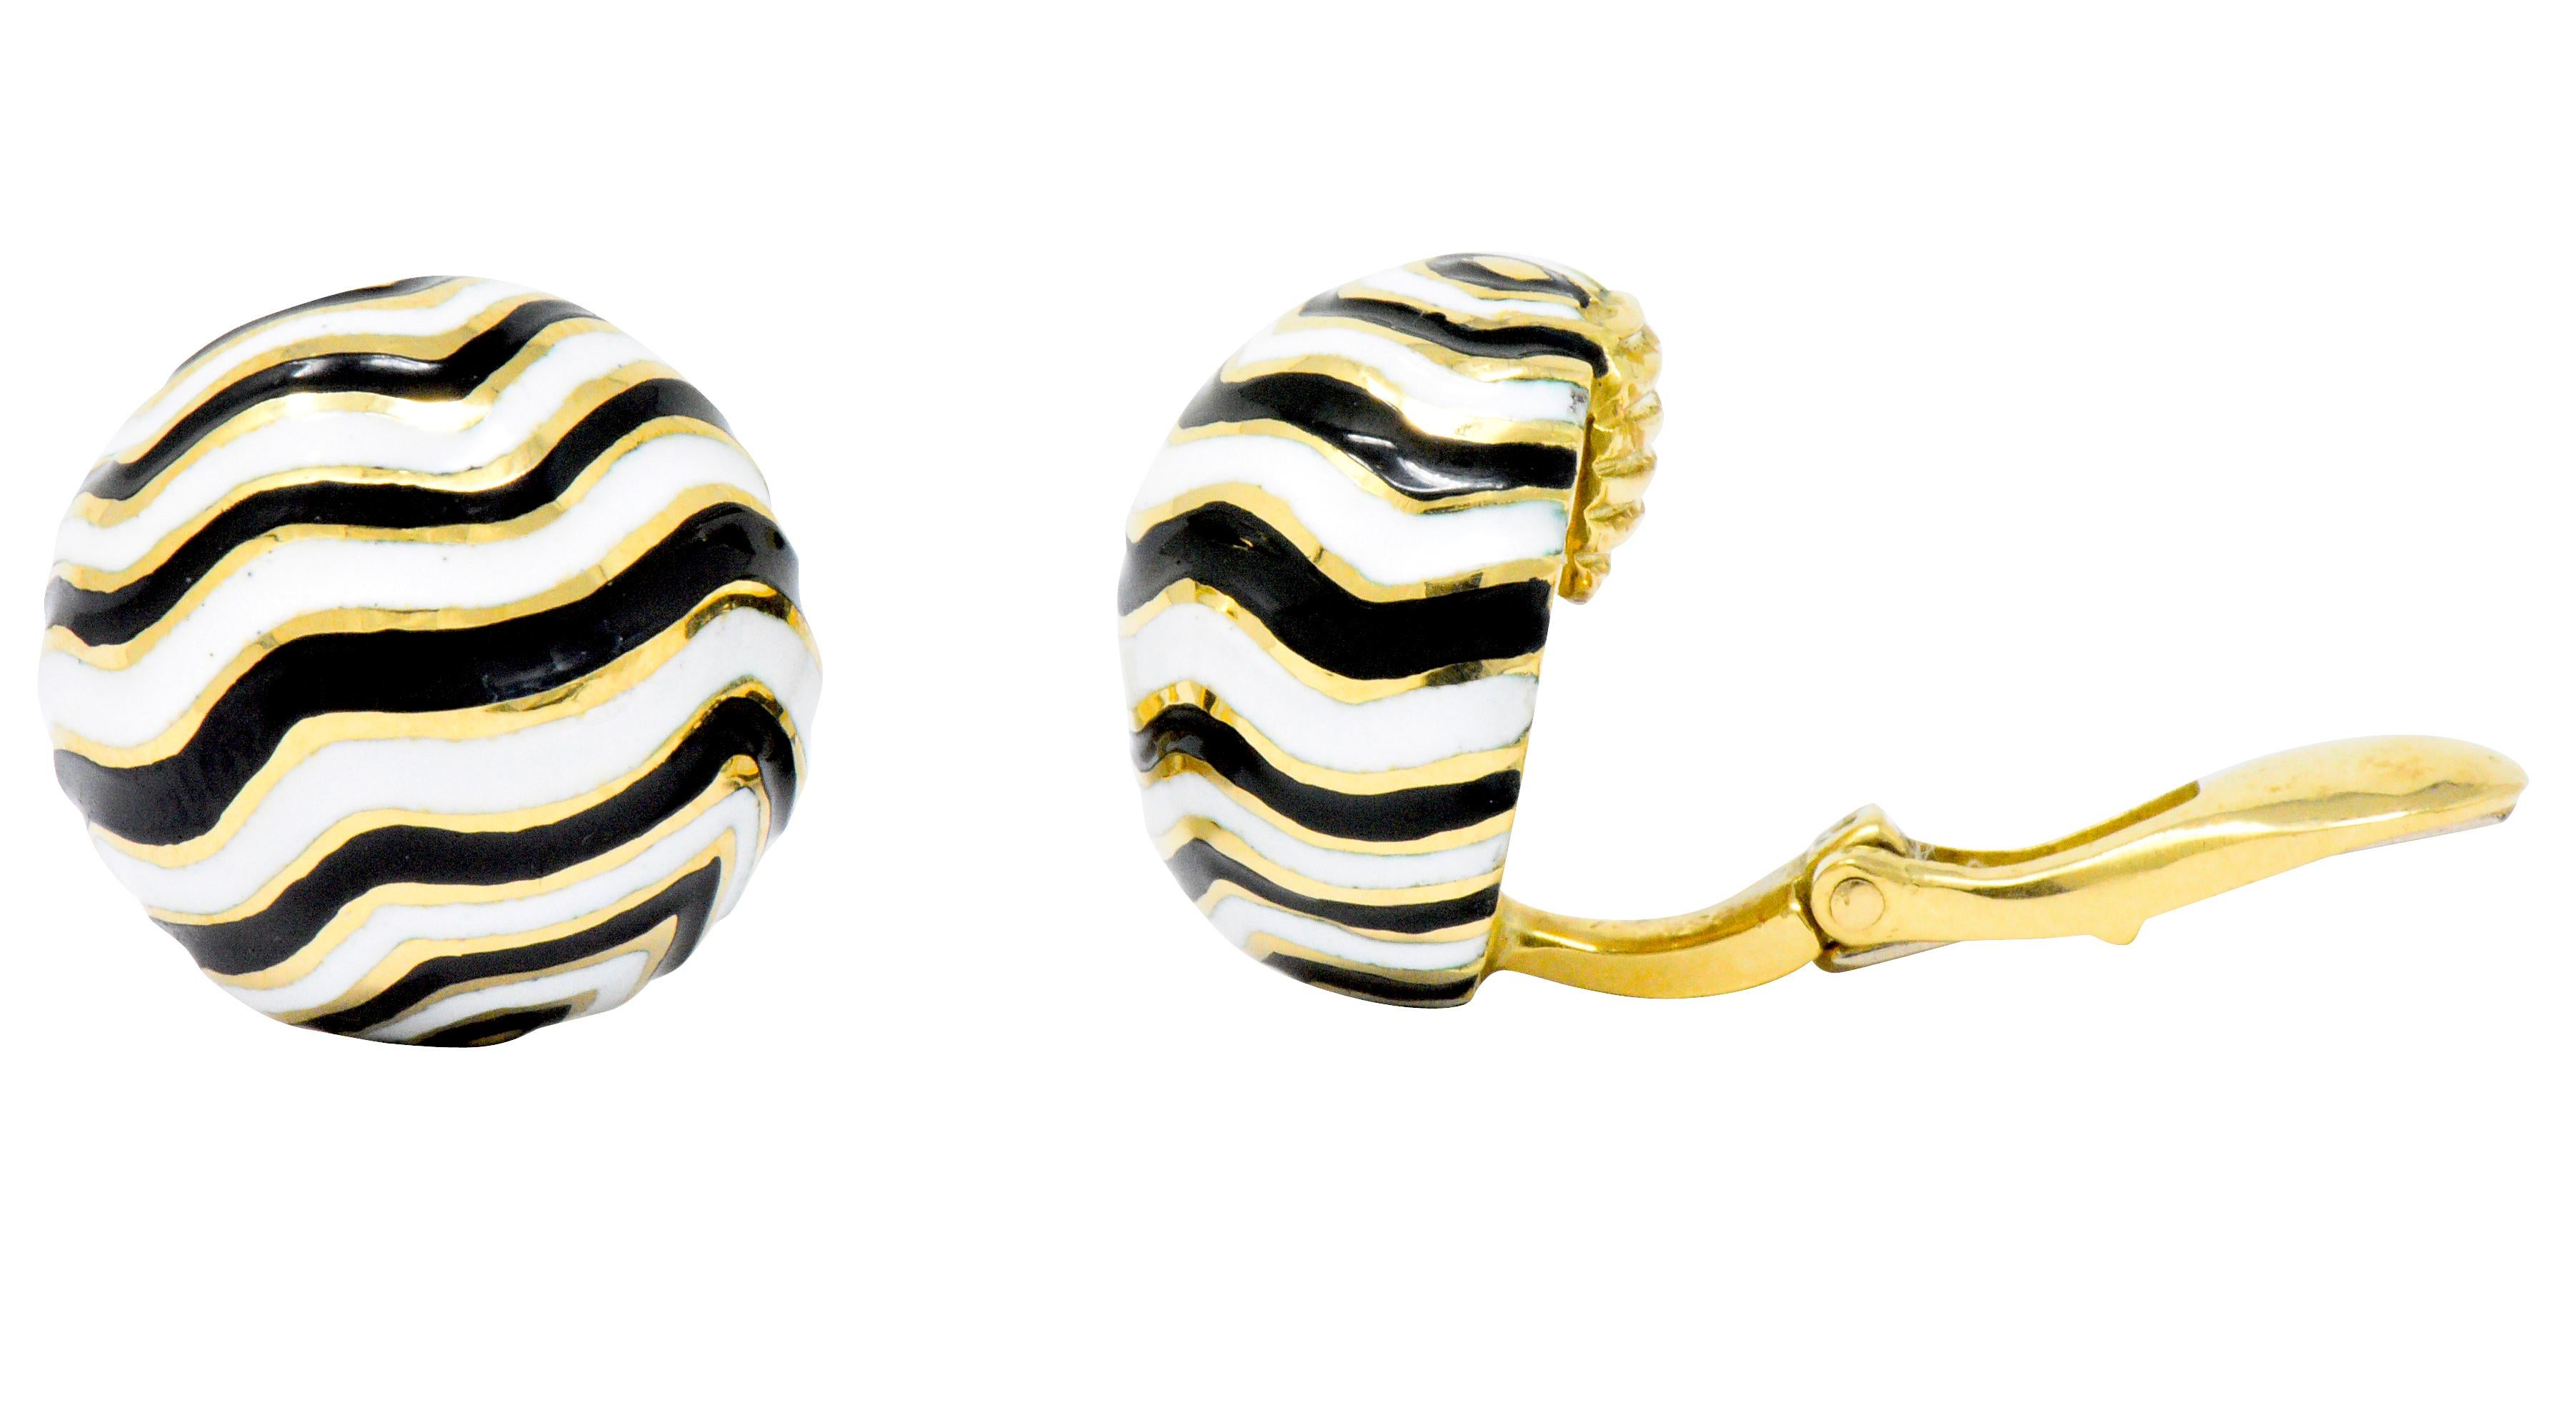 Featuring bold black and white striated enamel on round domed yellow gold surface

Striations resemble the coloring of a zebra

From the Kingdom Collection circa 1960

Hinged ear clips with secure tension

Measuring 14 mm x 15 mm x 8 mm deep

Total